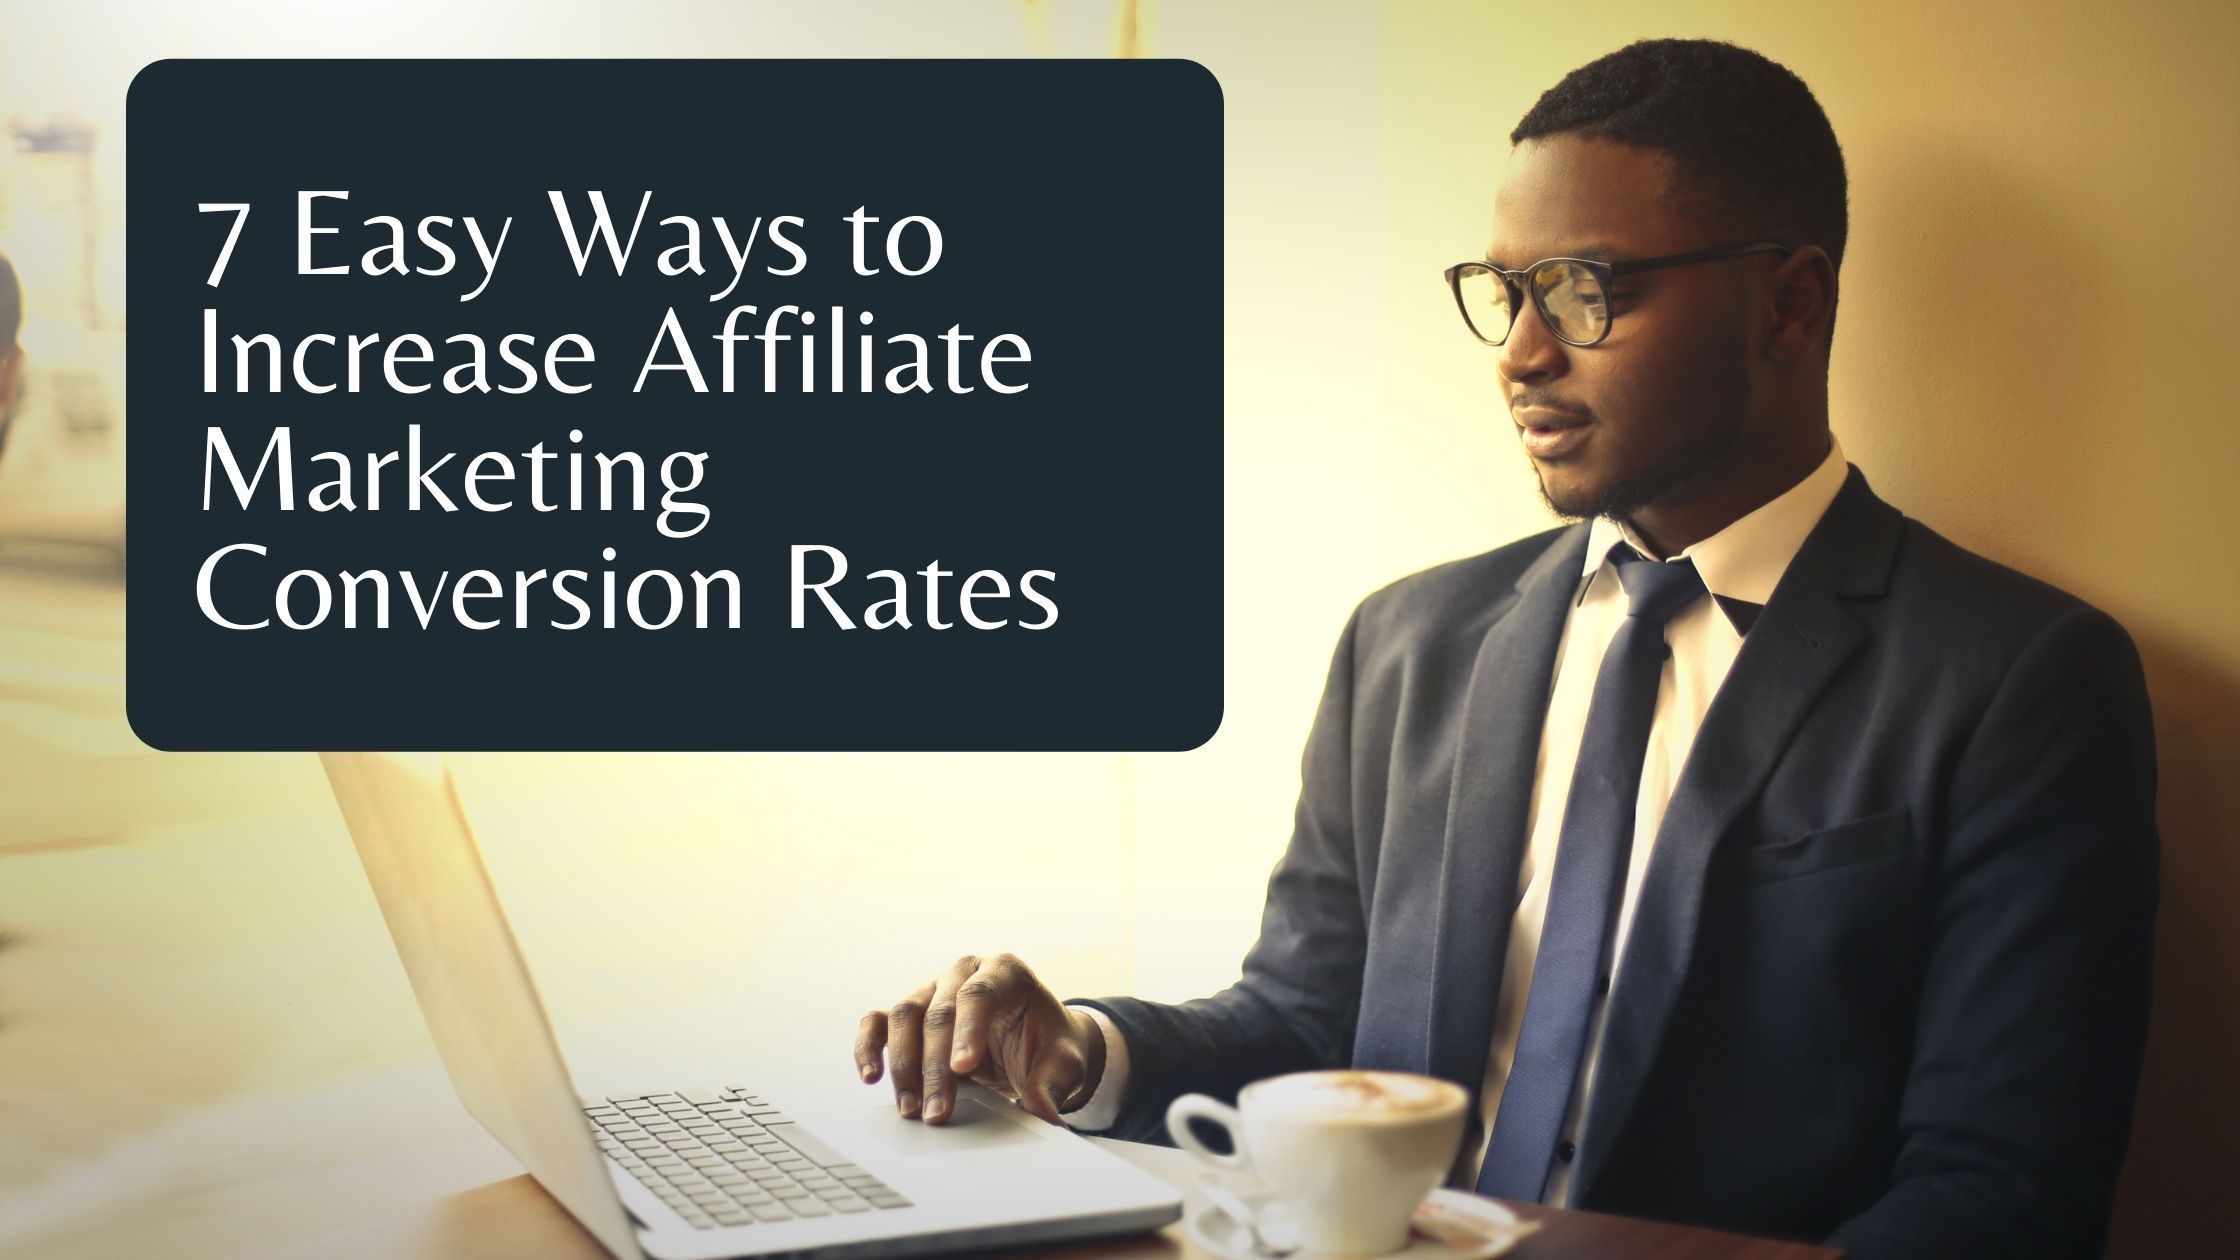 7 Easy Ways to Increase Affiliate Marketing Conversion Rates